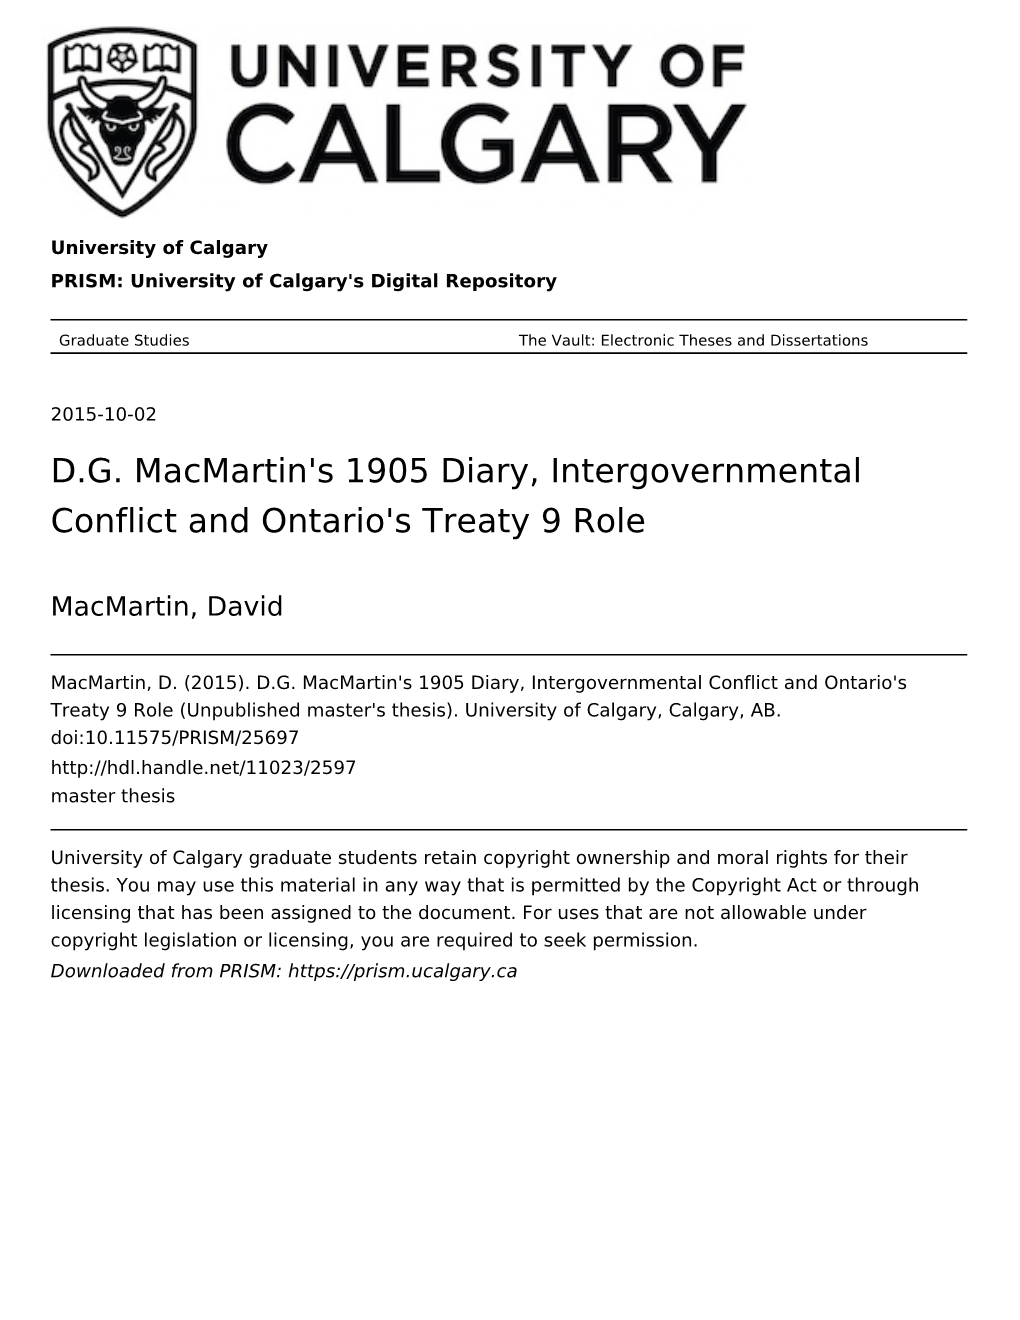 D.G. Macmartin's 1905 Diary, Intergovernmental Conflict and Ontario's Treaty 9 Role